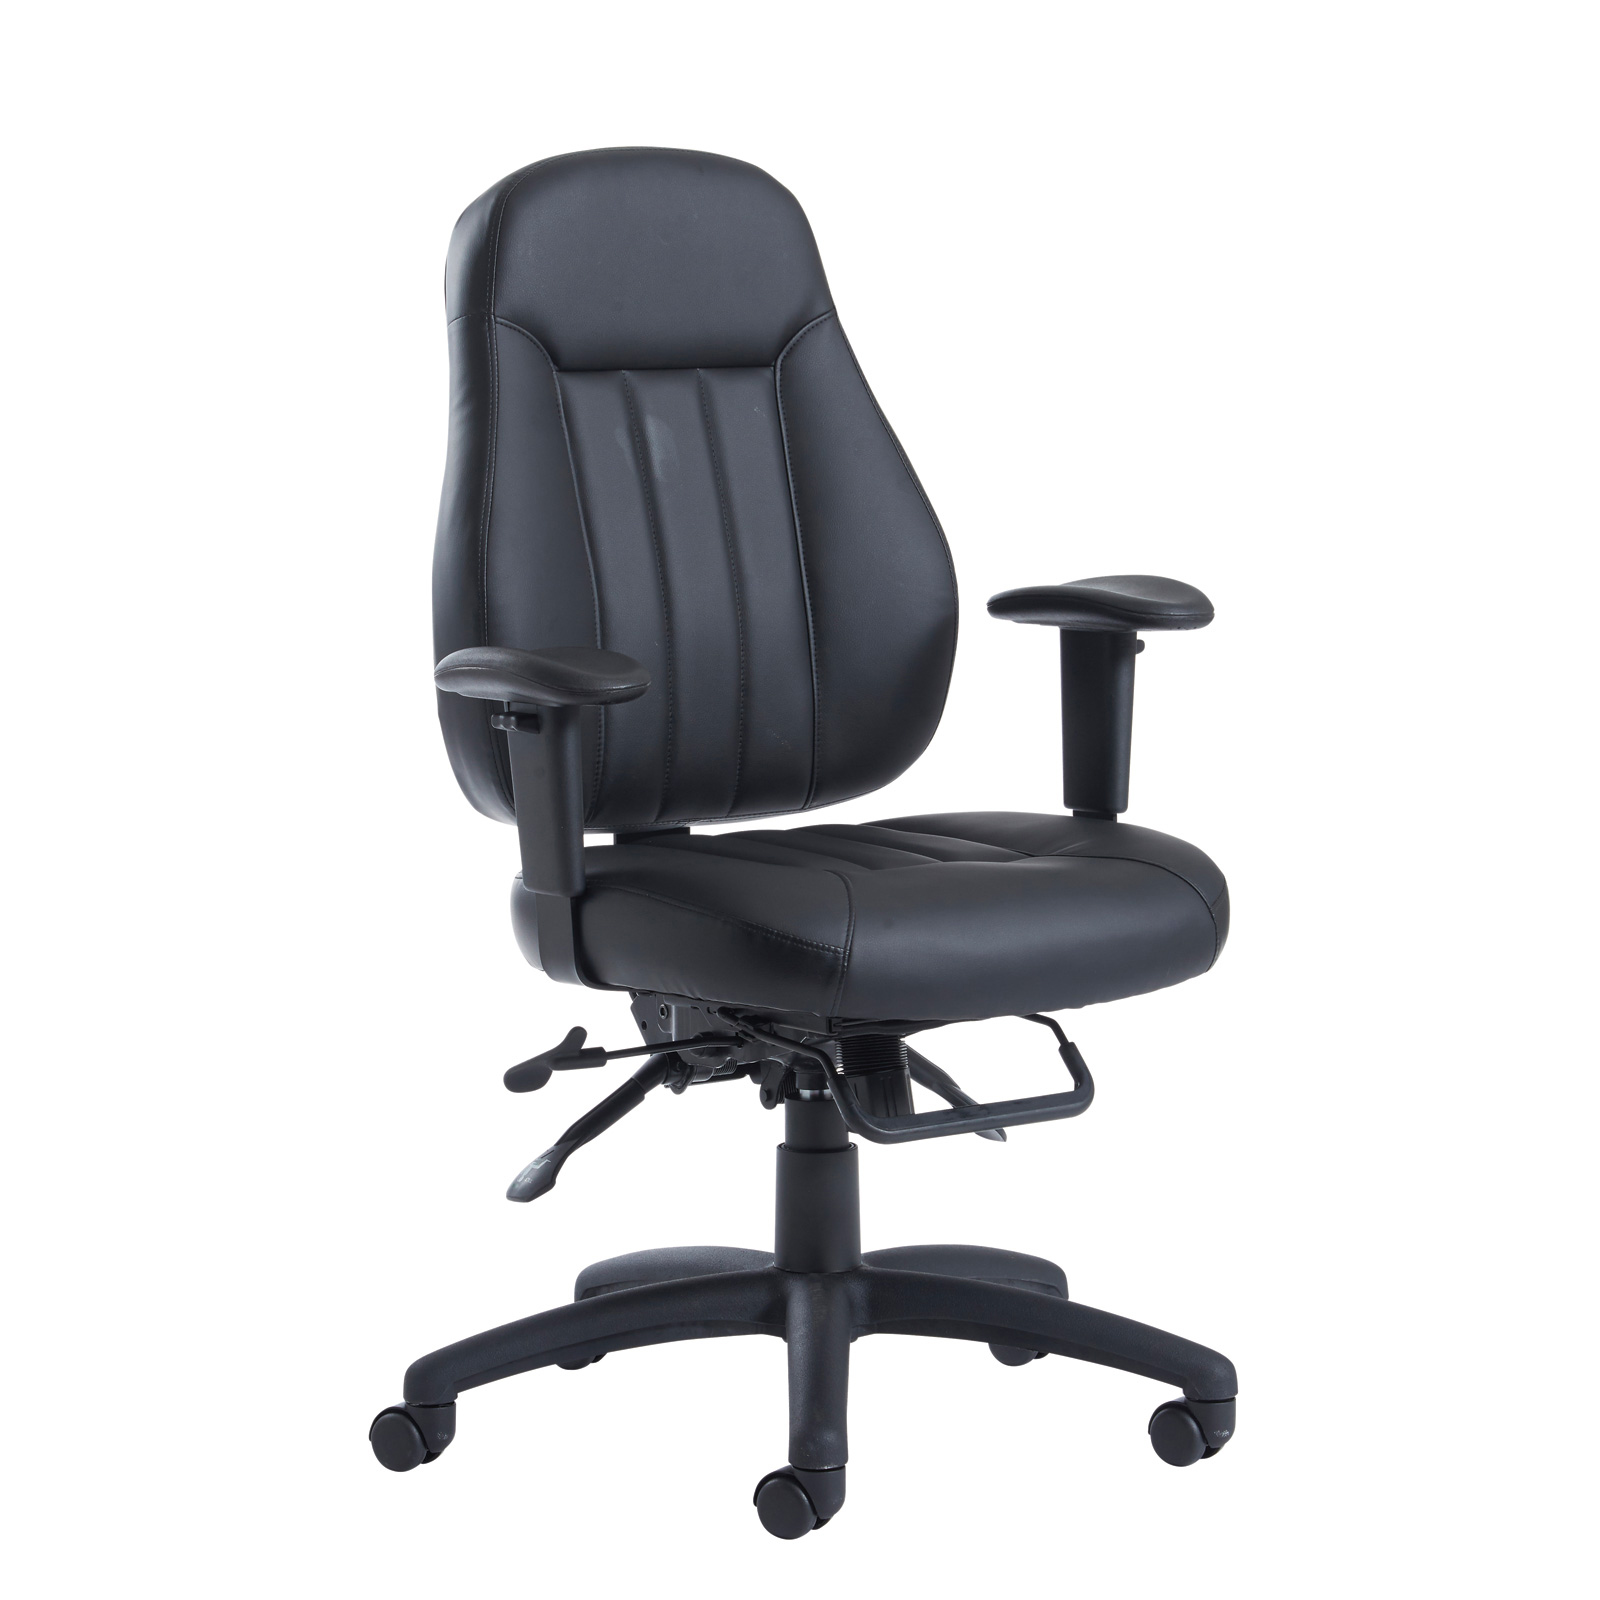 Executive Chairs Zeus medium back 24hr task chair - black faux leather